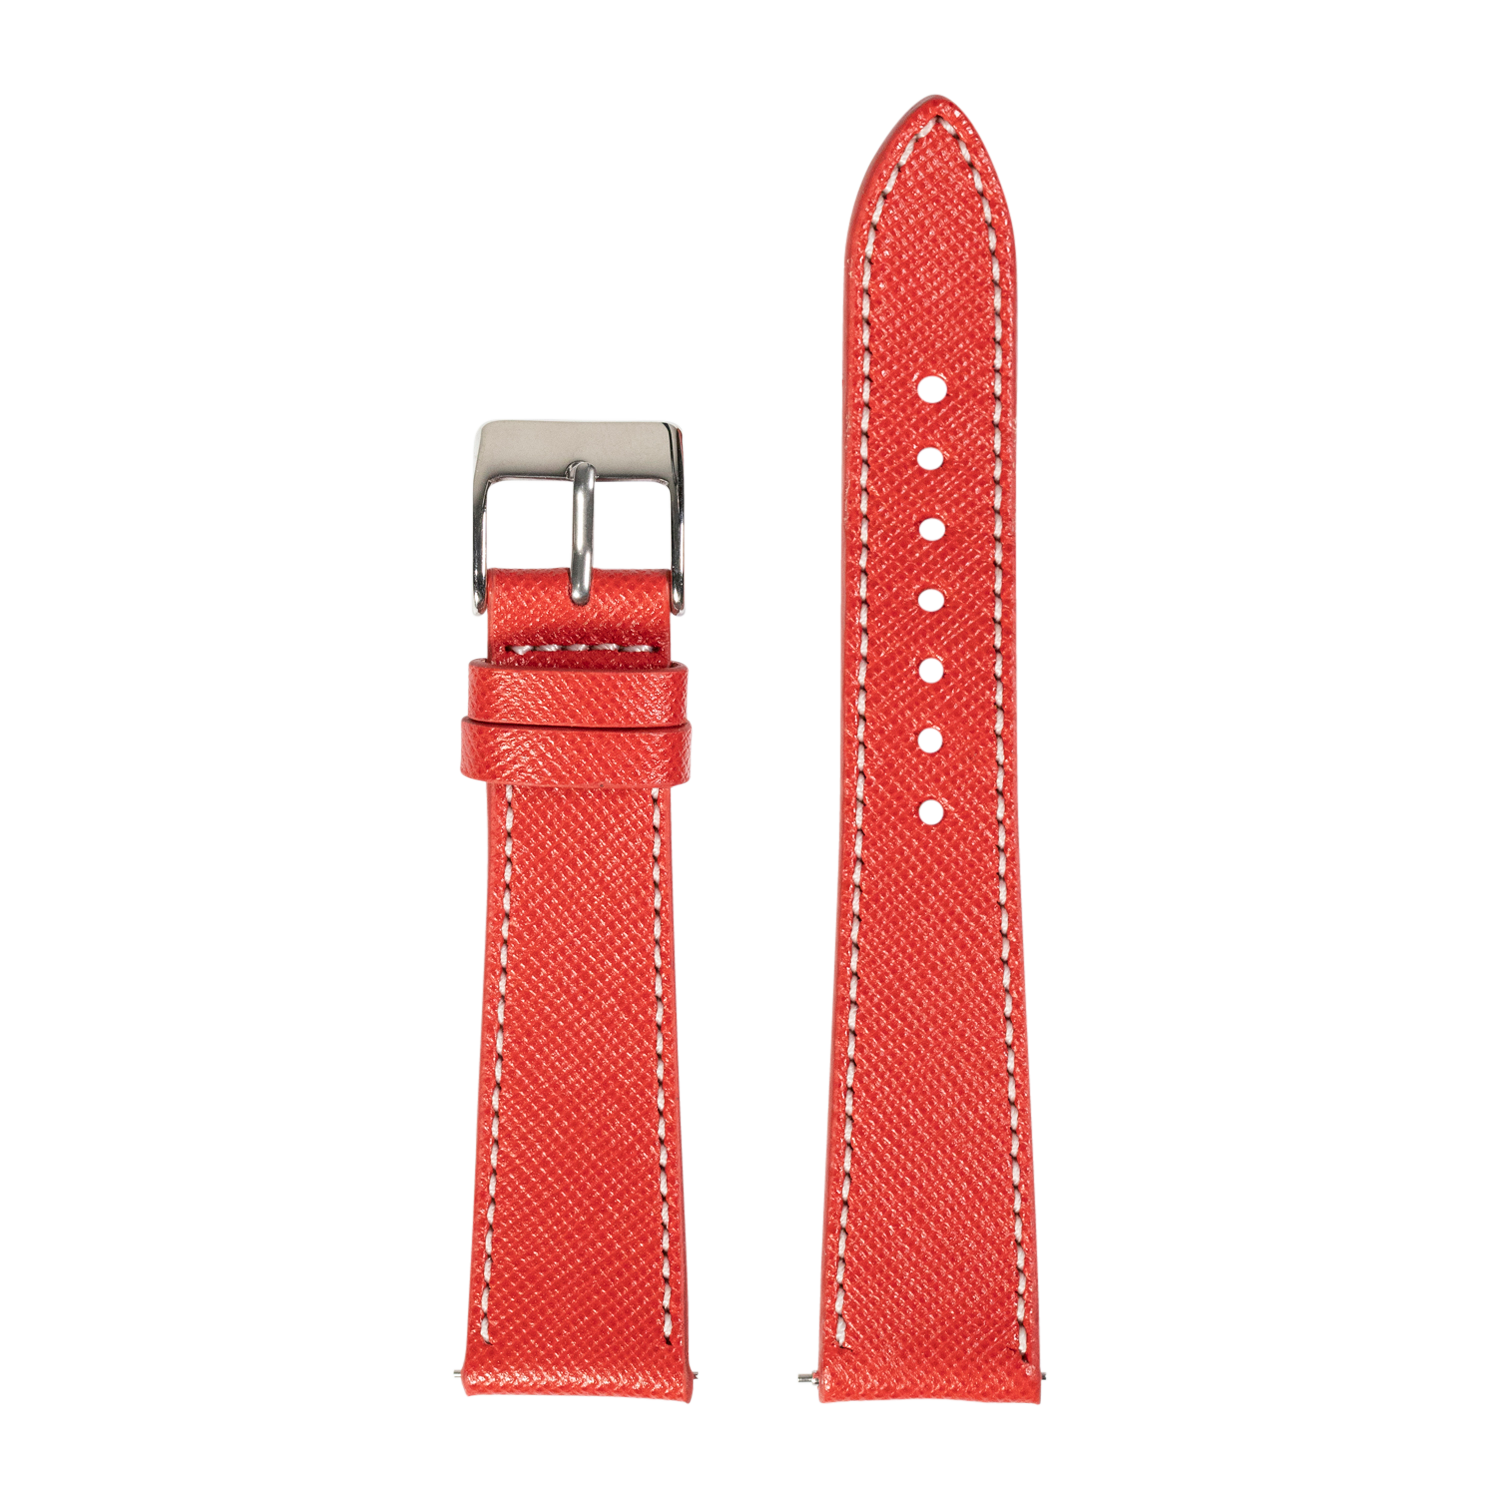 [QuickFit] Saffiano Leather - Red with White Stitching 20mm